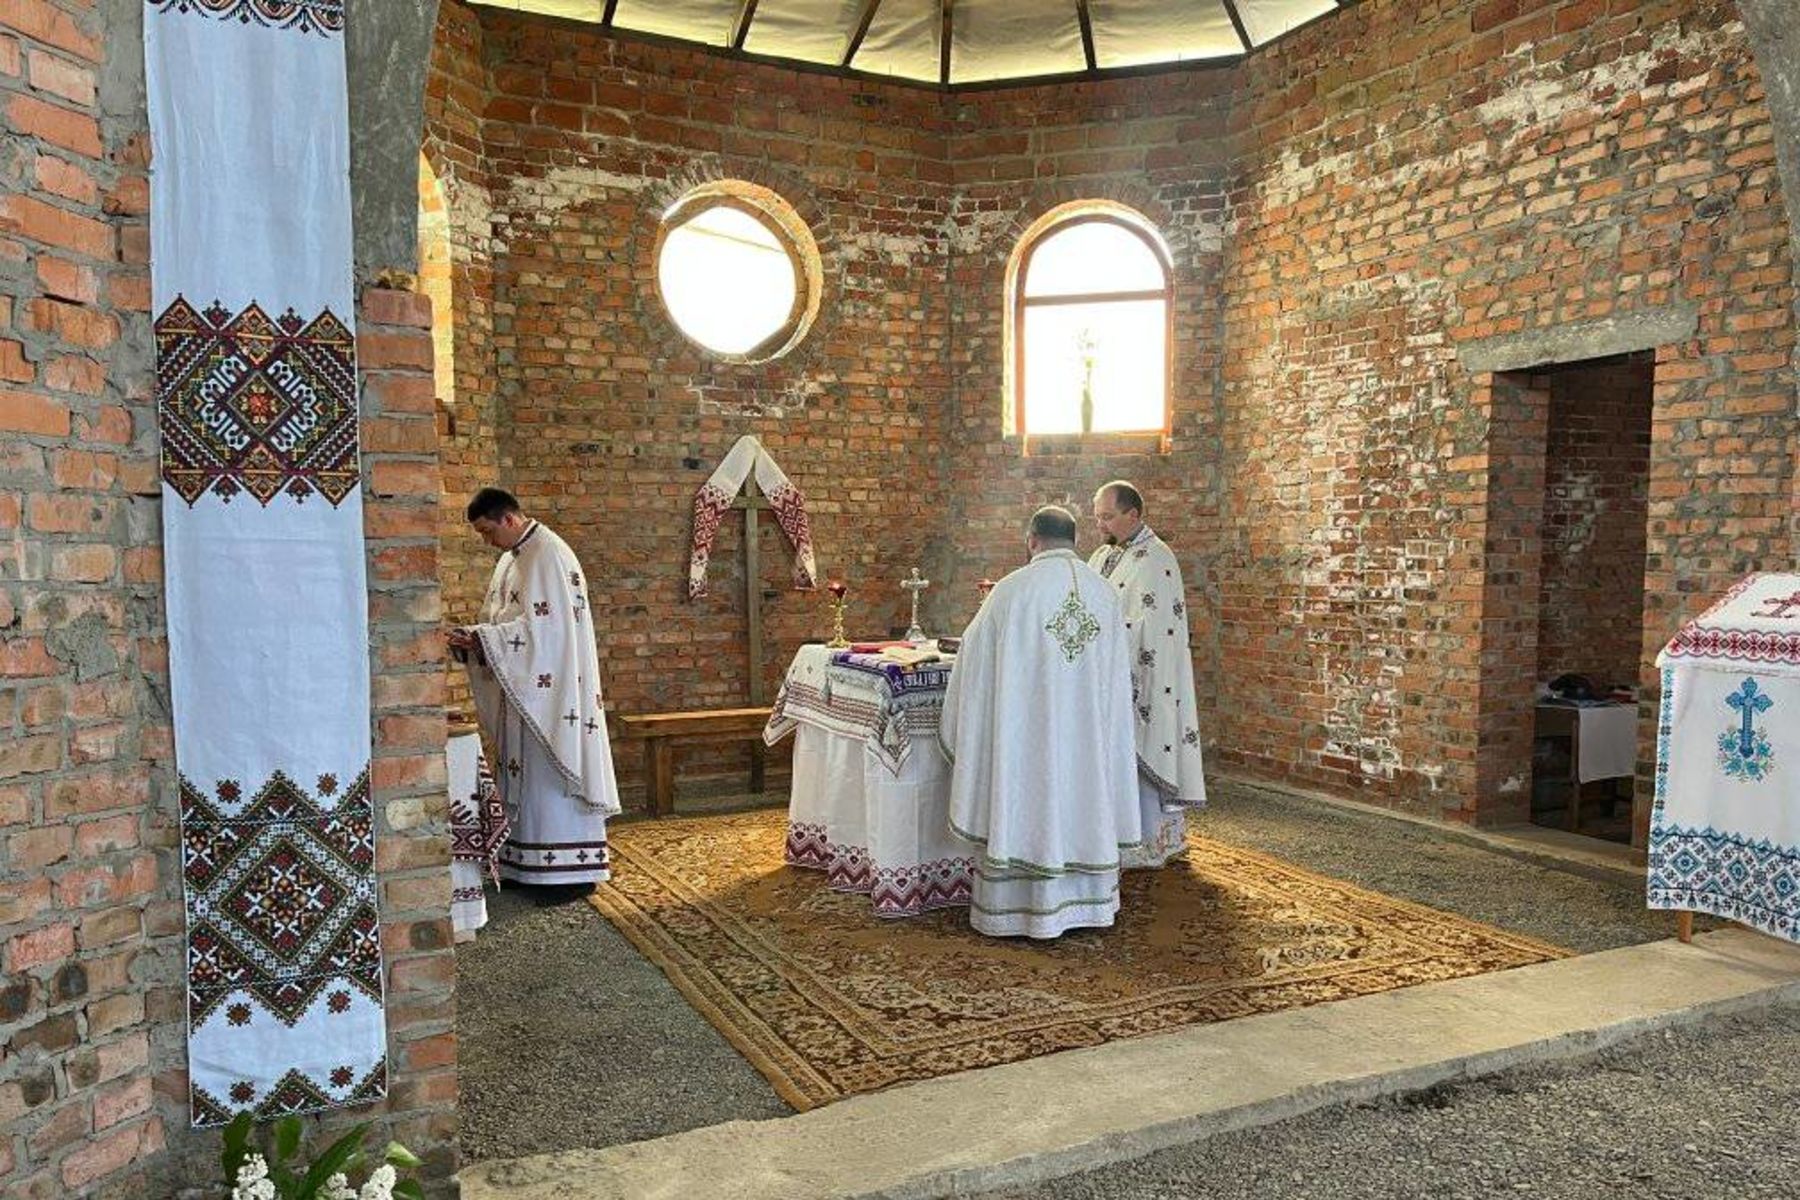 First Liturgy celebrated in newly built church in Kovel